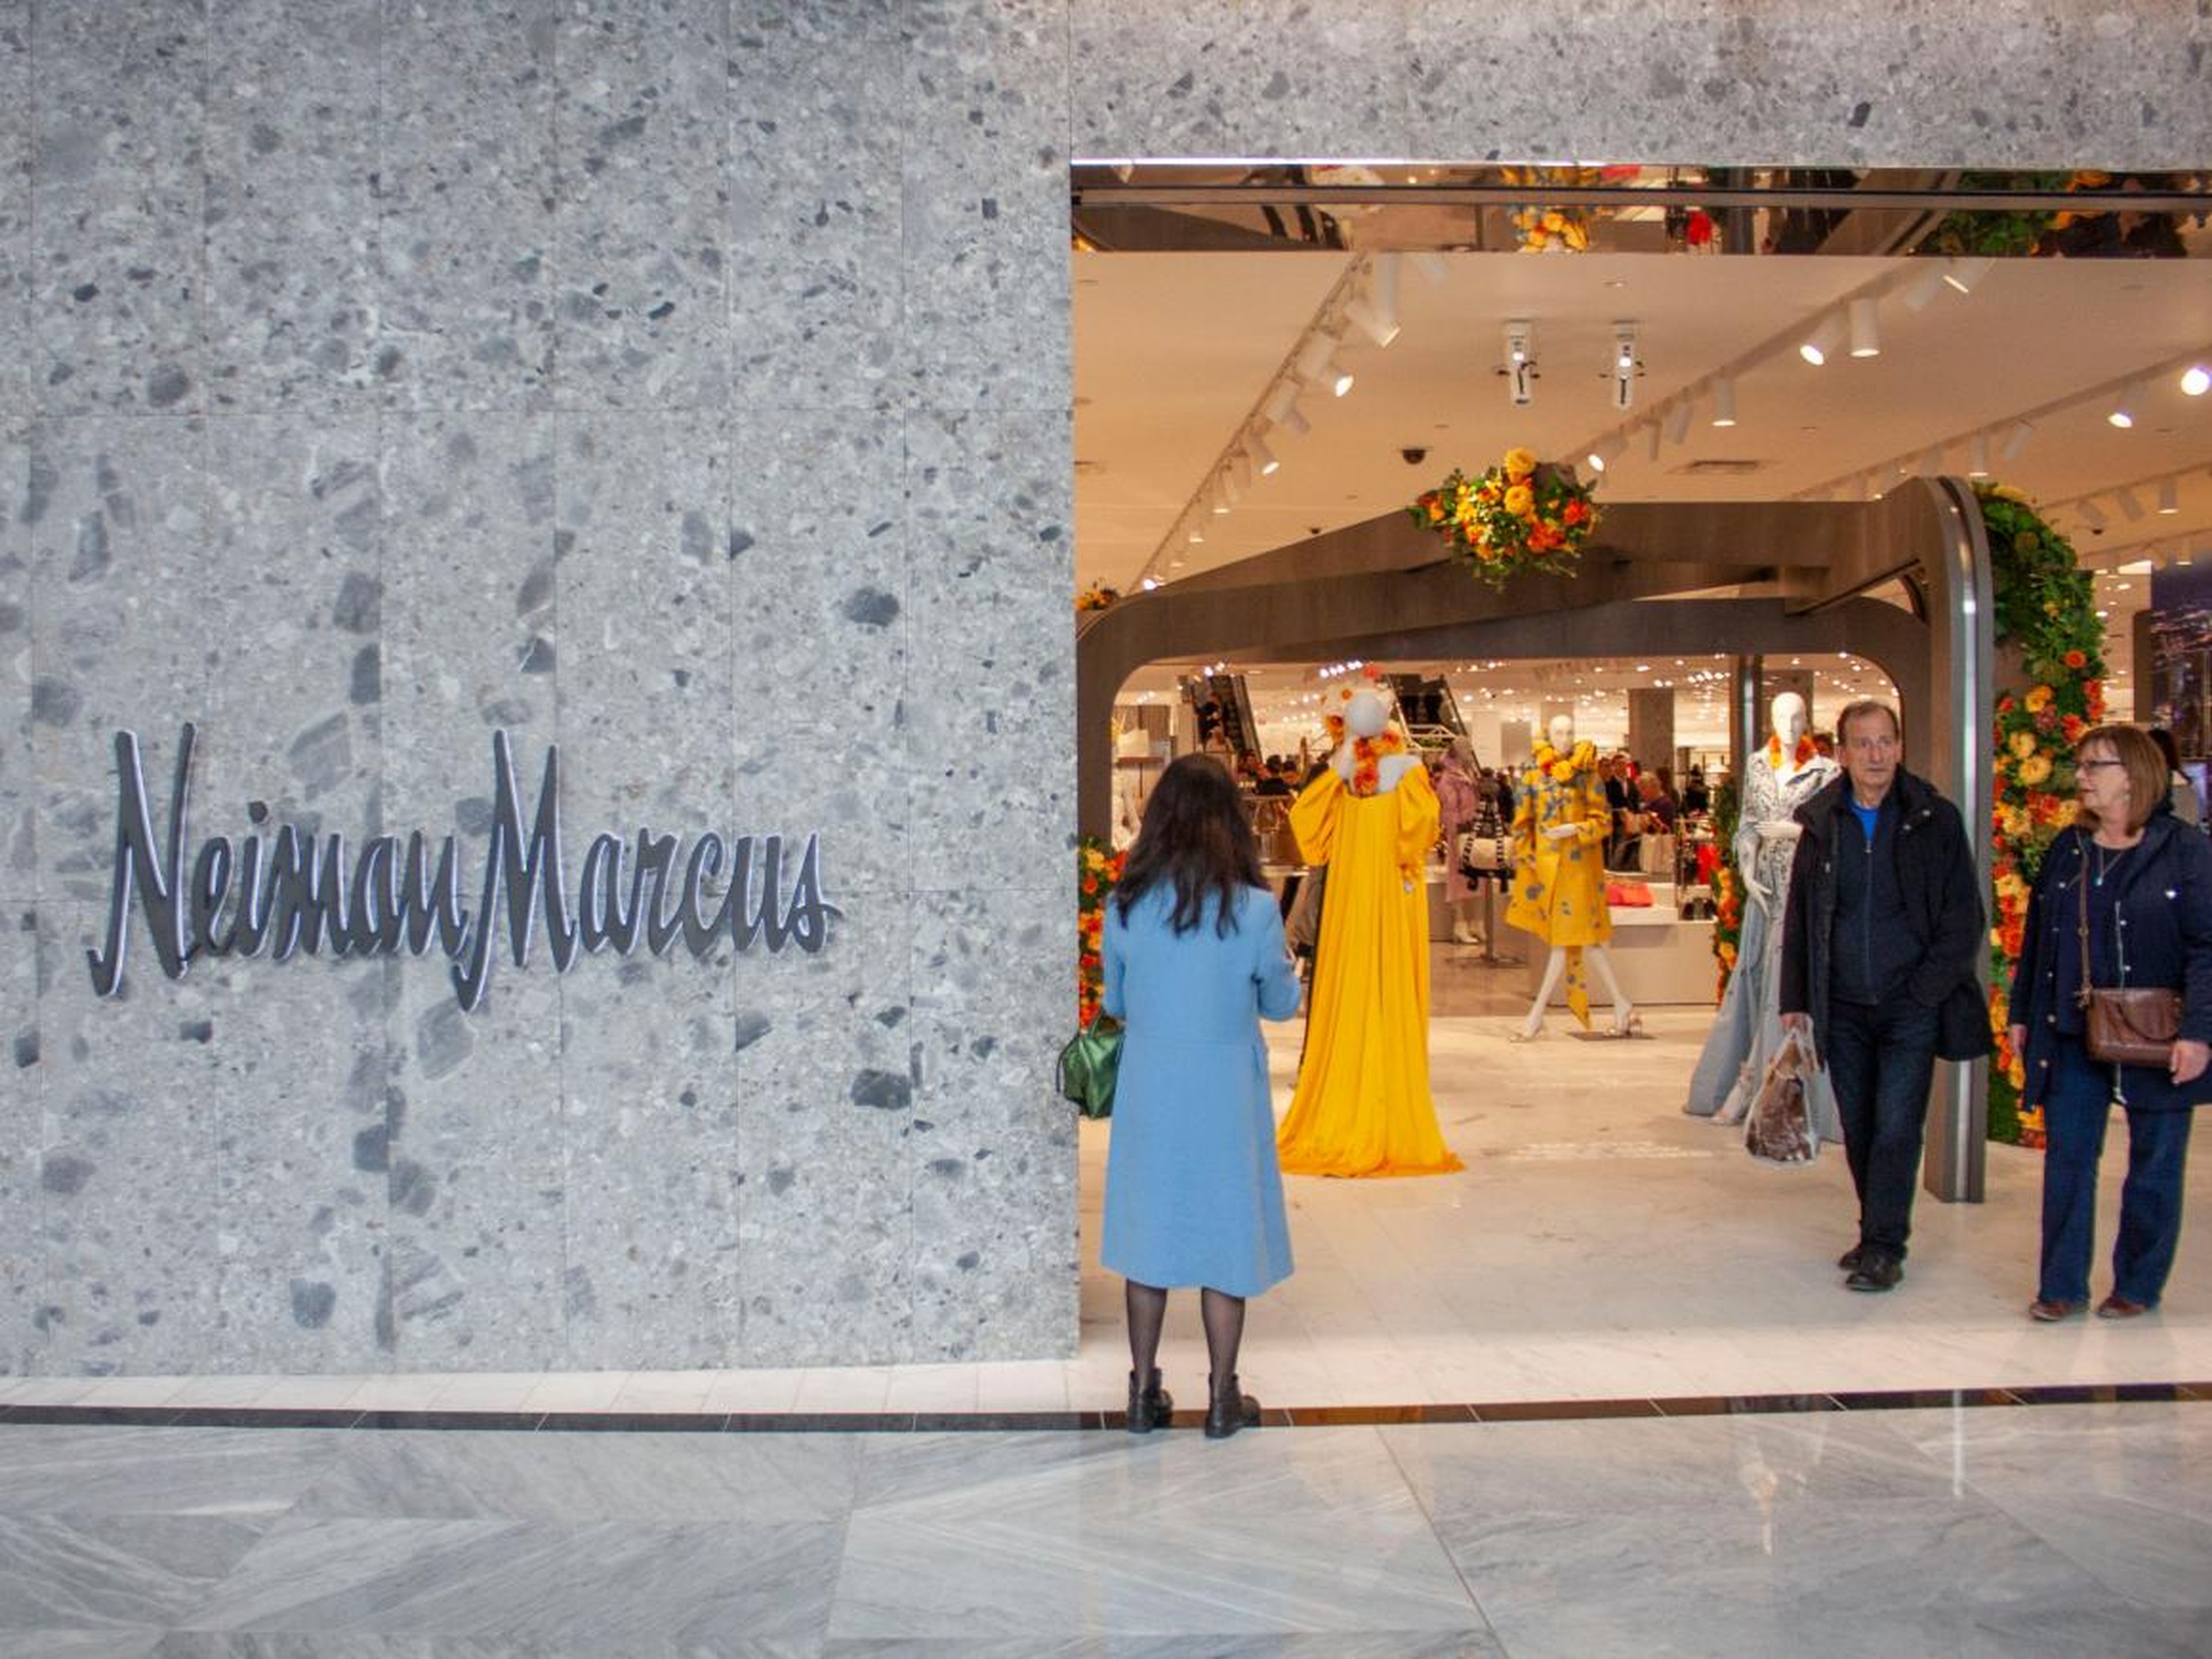 The shopping center is also home to New York City's first Neiman Marcus department store.